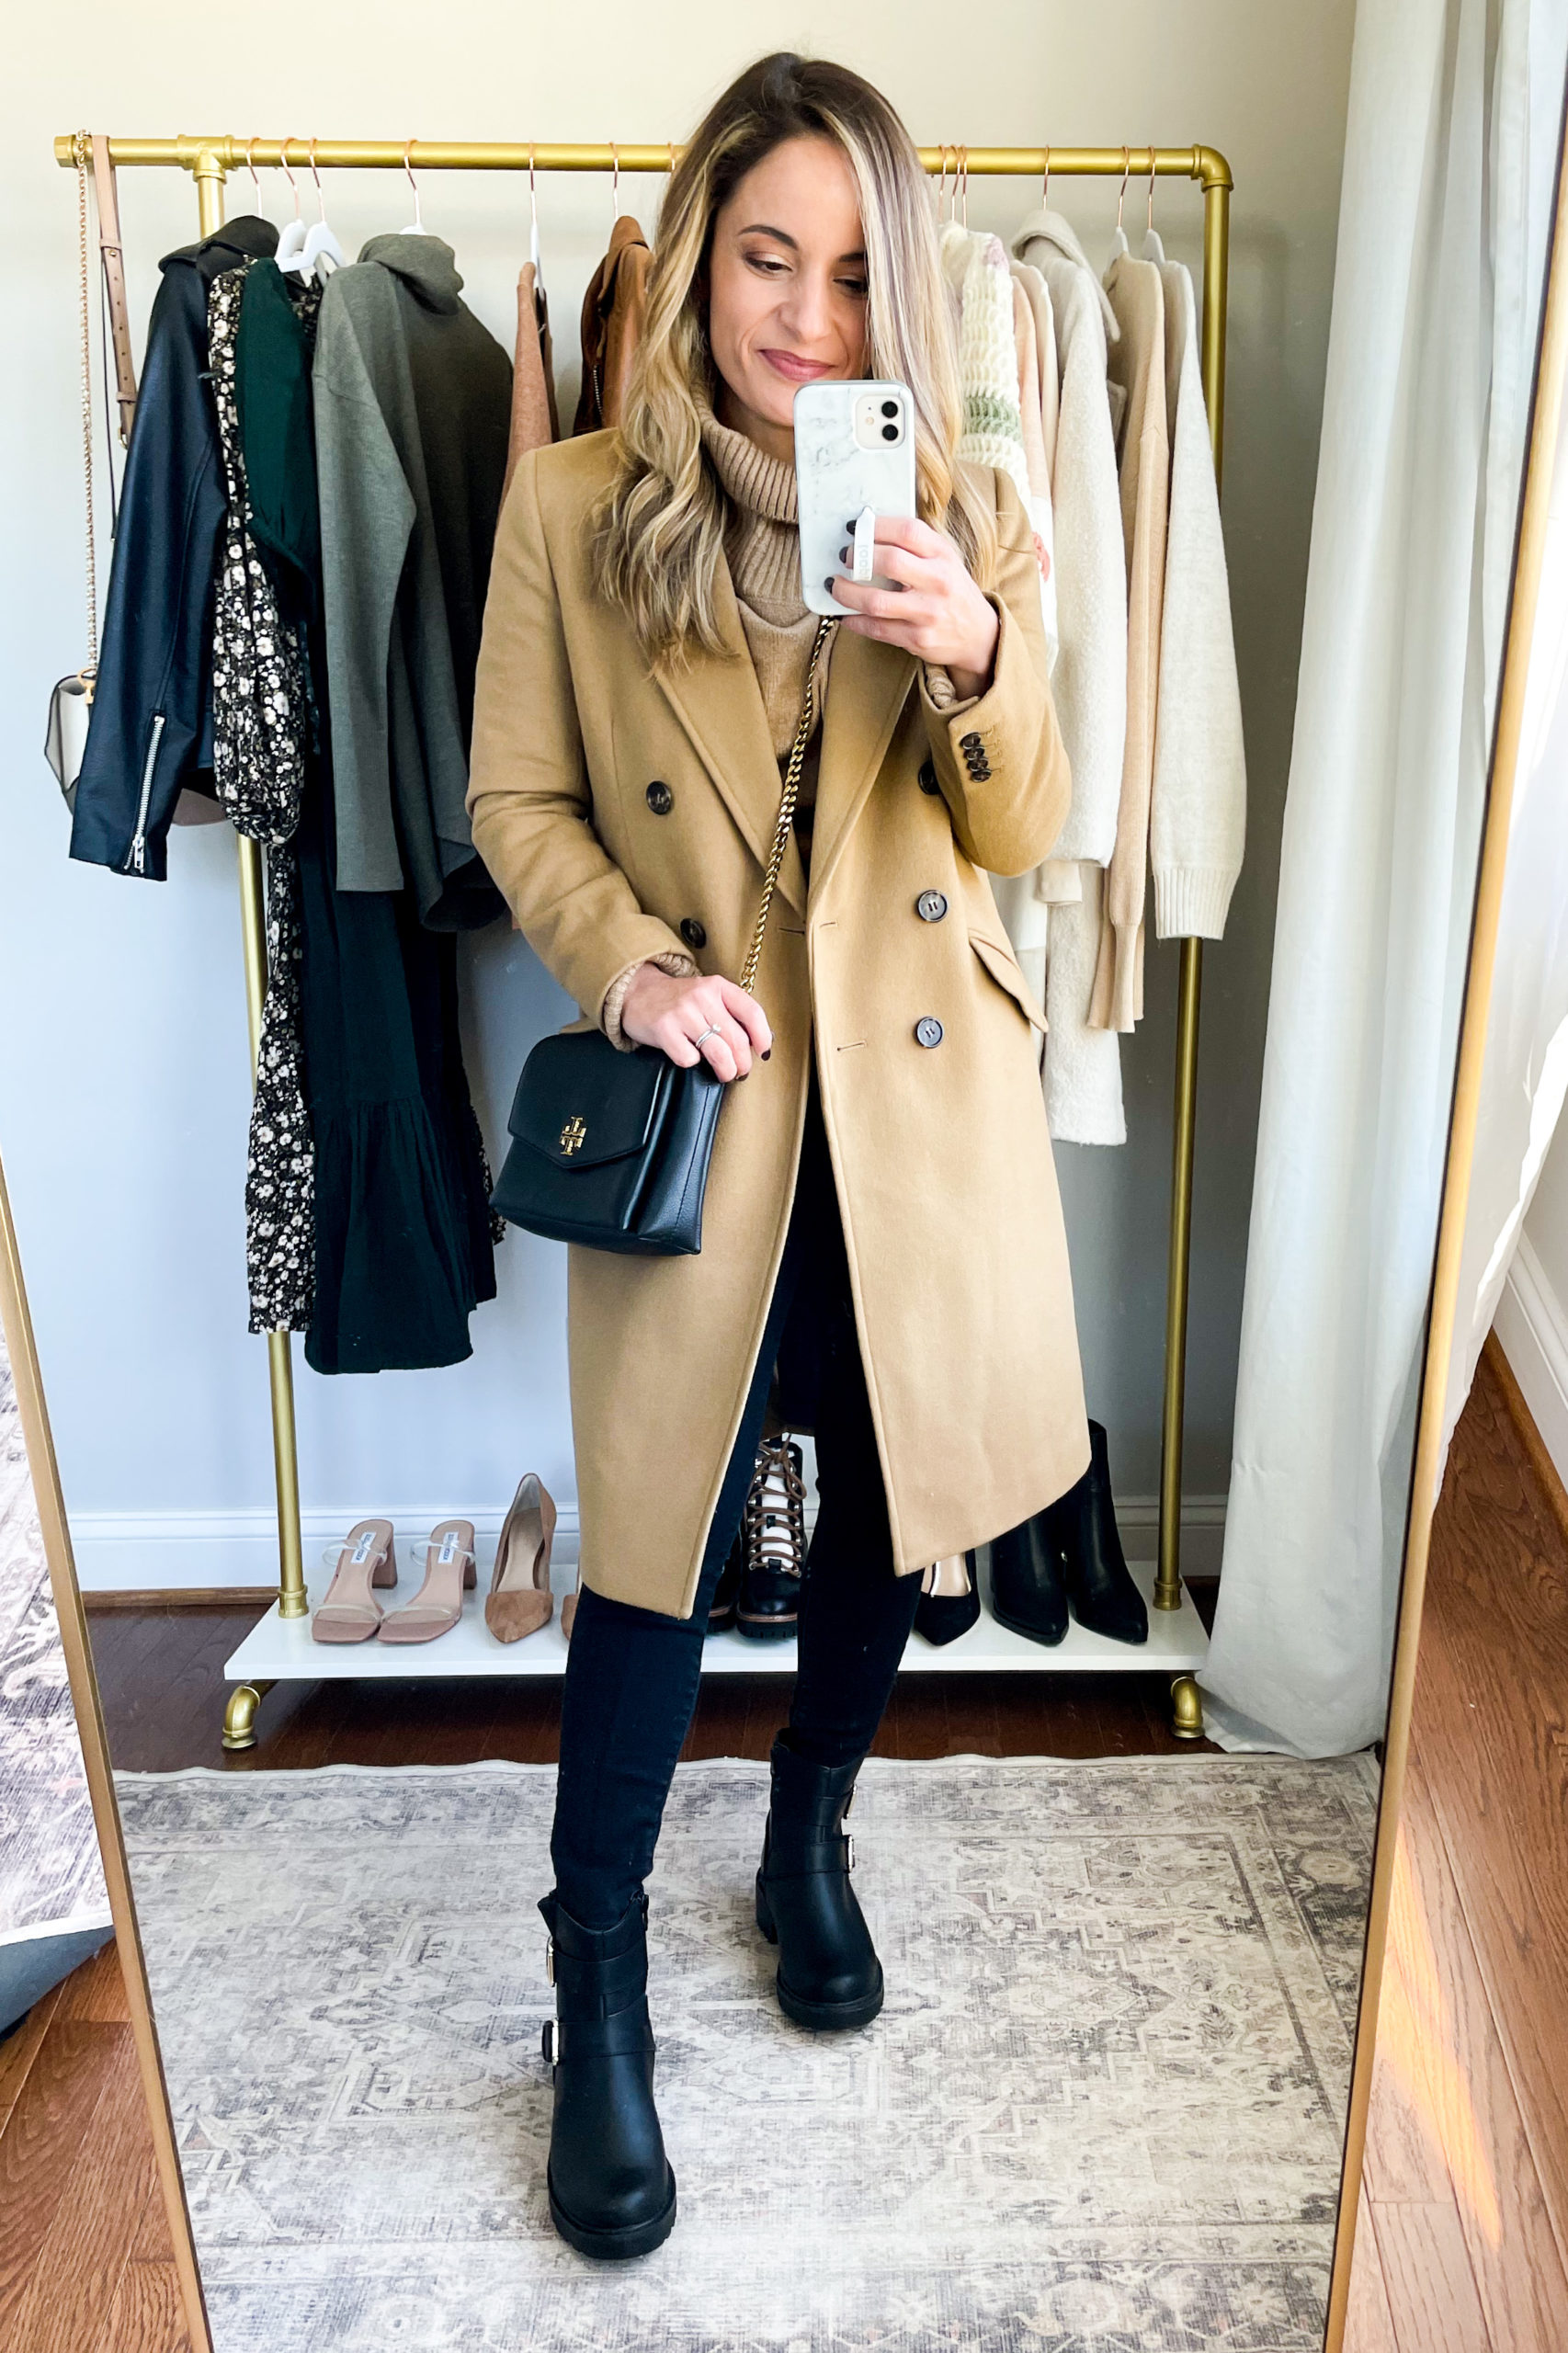 Top coat outfit for fall via pumps and push-ups blog | petite style | petite fashion | fall fashion | winter style | lug boots outfits | ways to wear lug boots 